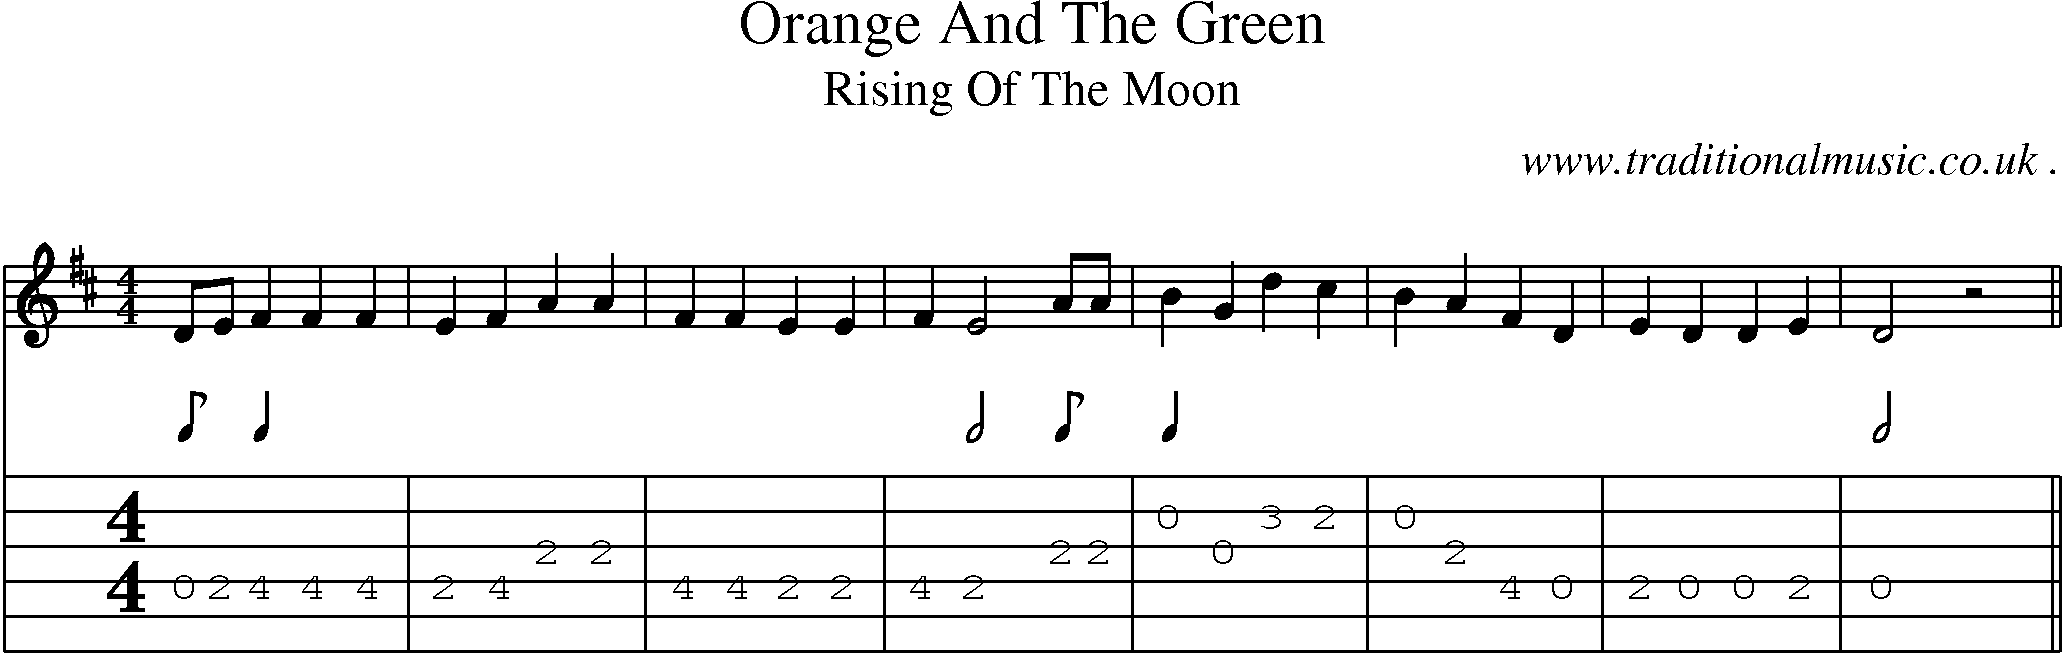 Sheet-Music and Guitar Tabs for Orange And The Green